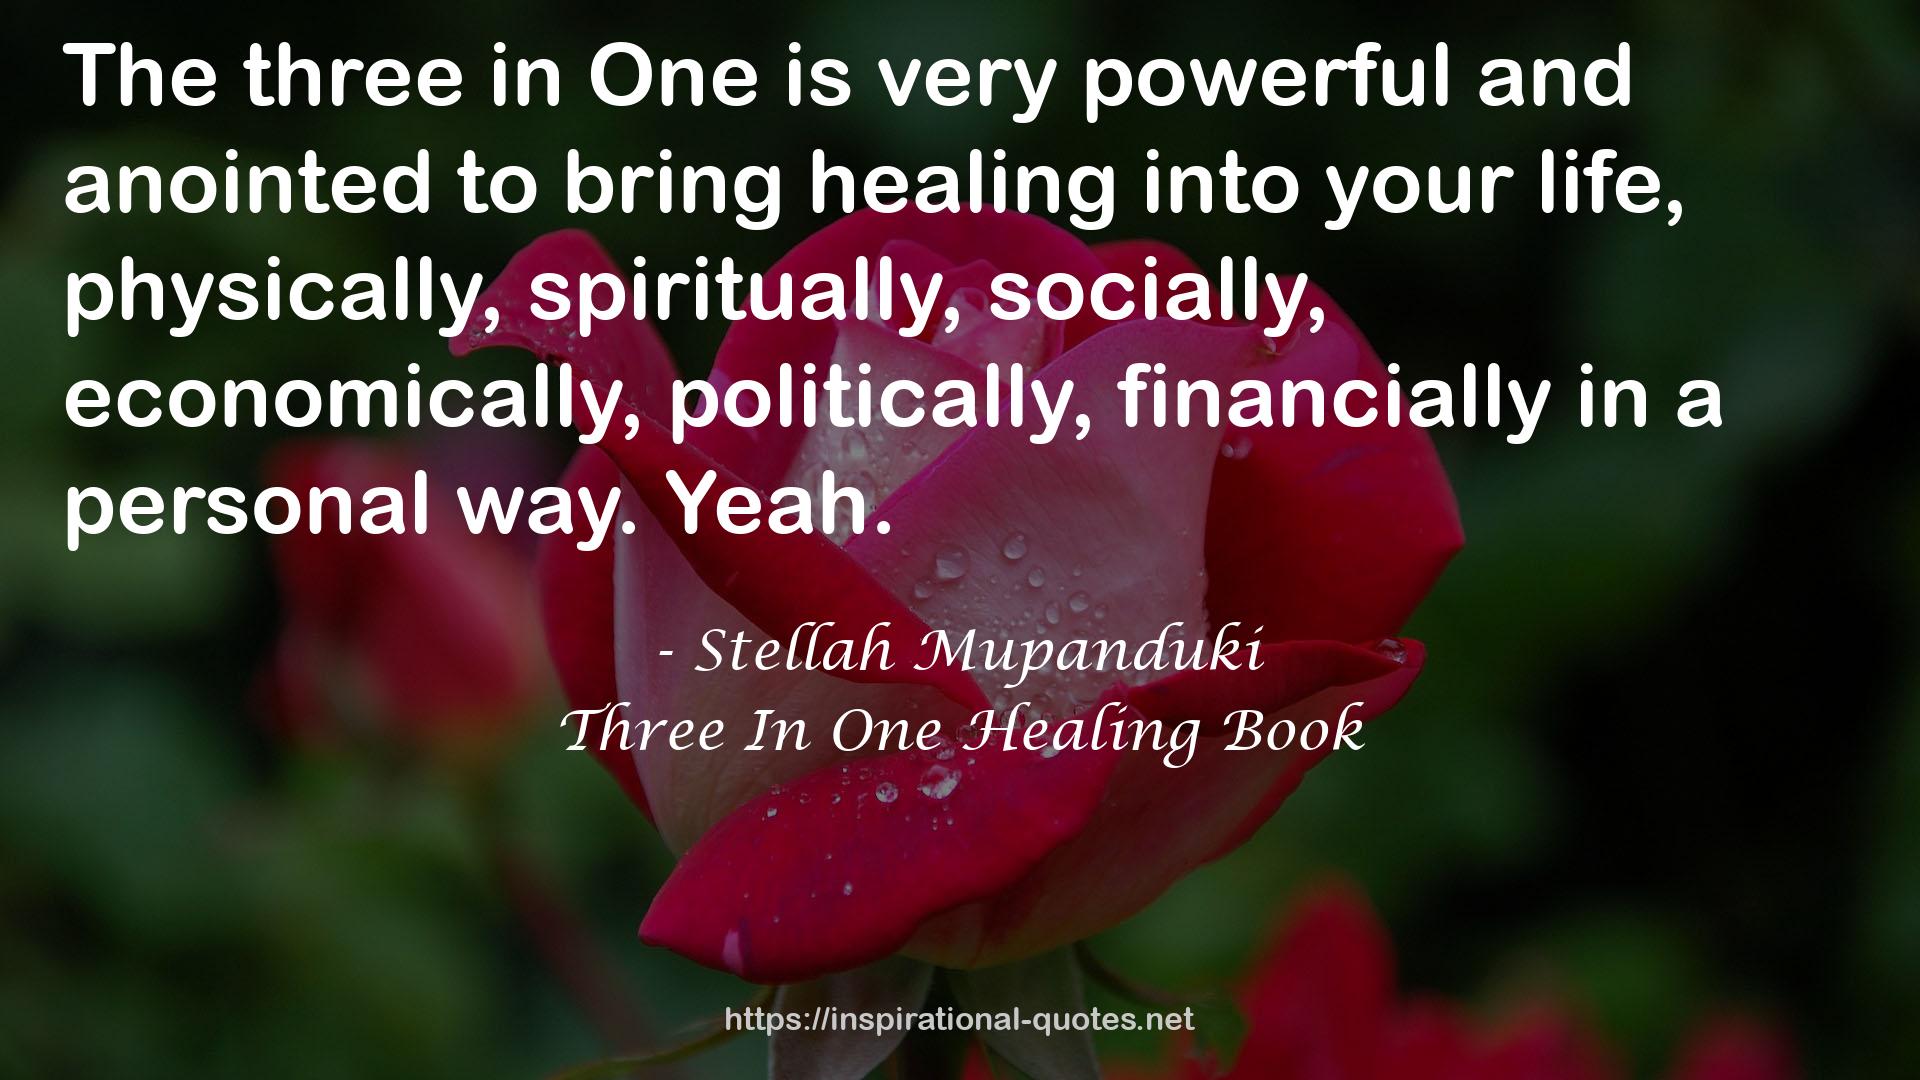 Three In One Healing Book QUOTES